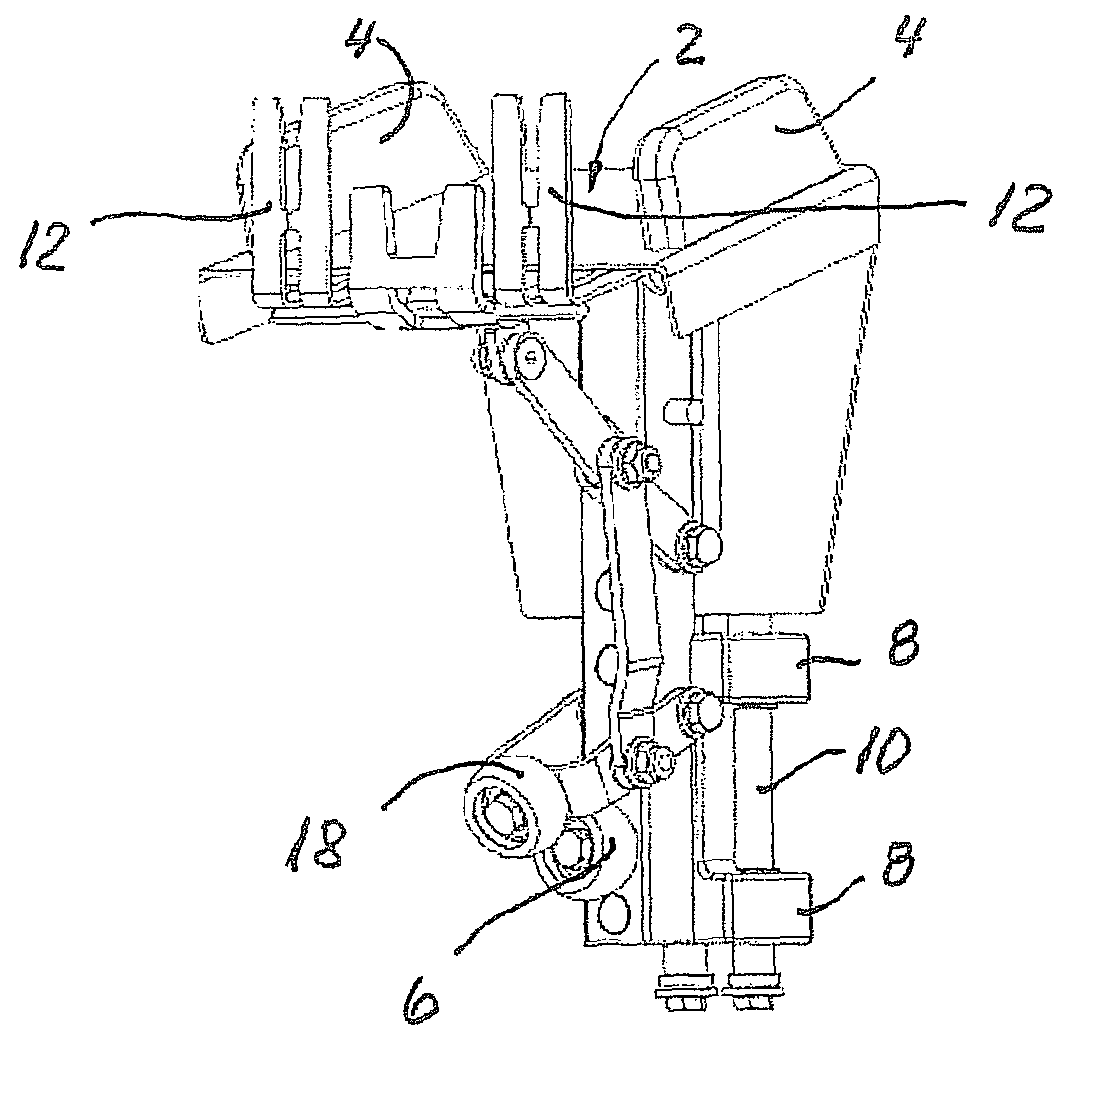 Method and apparatus for suspending poultry to be slaughtered